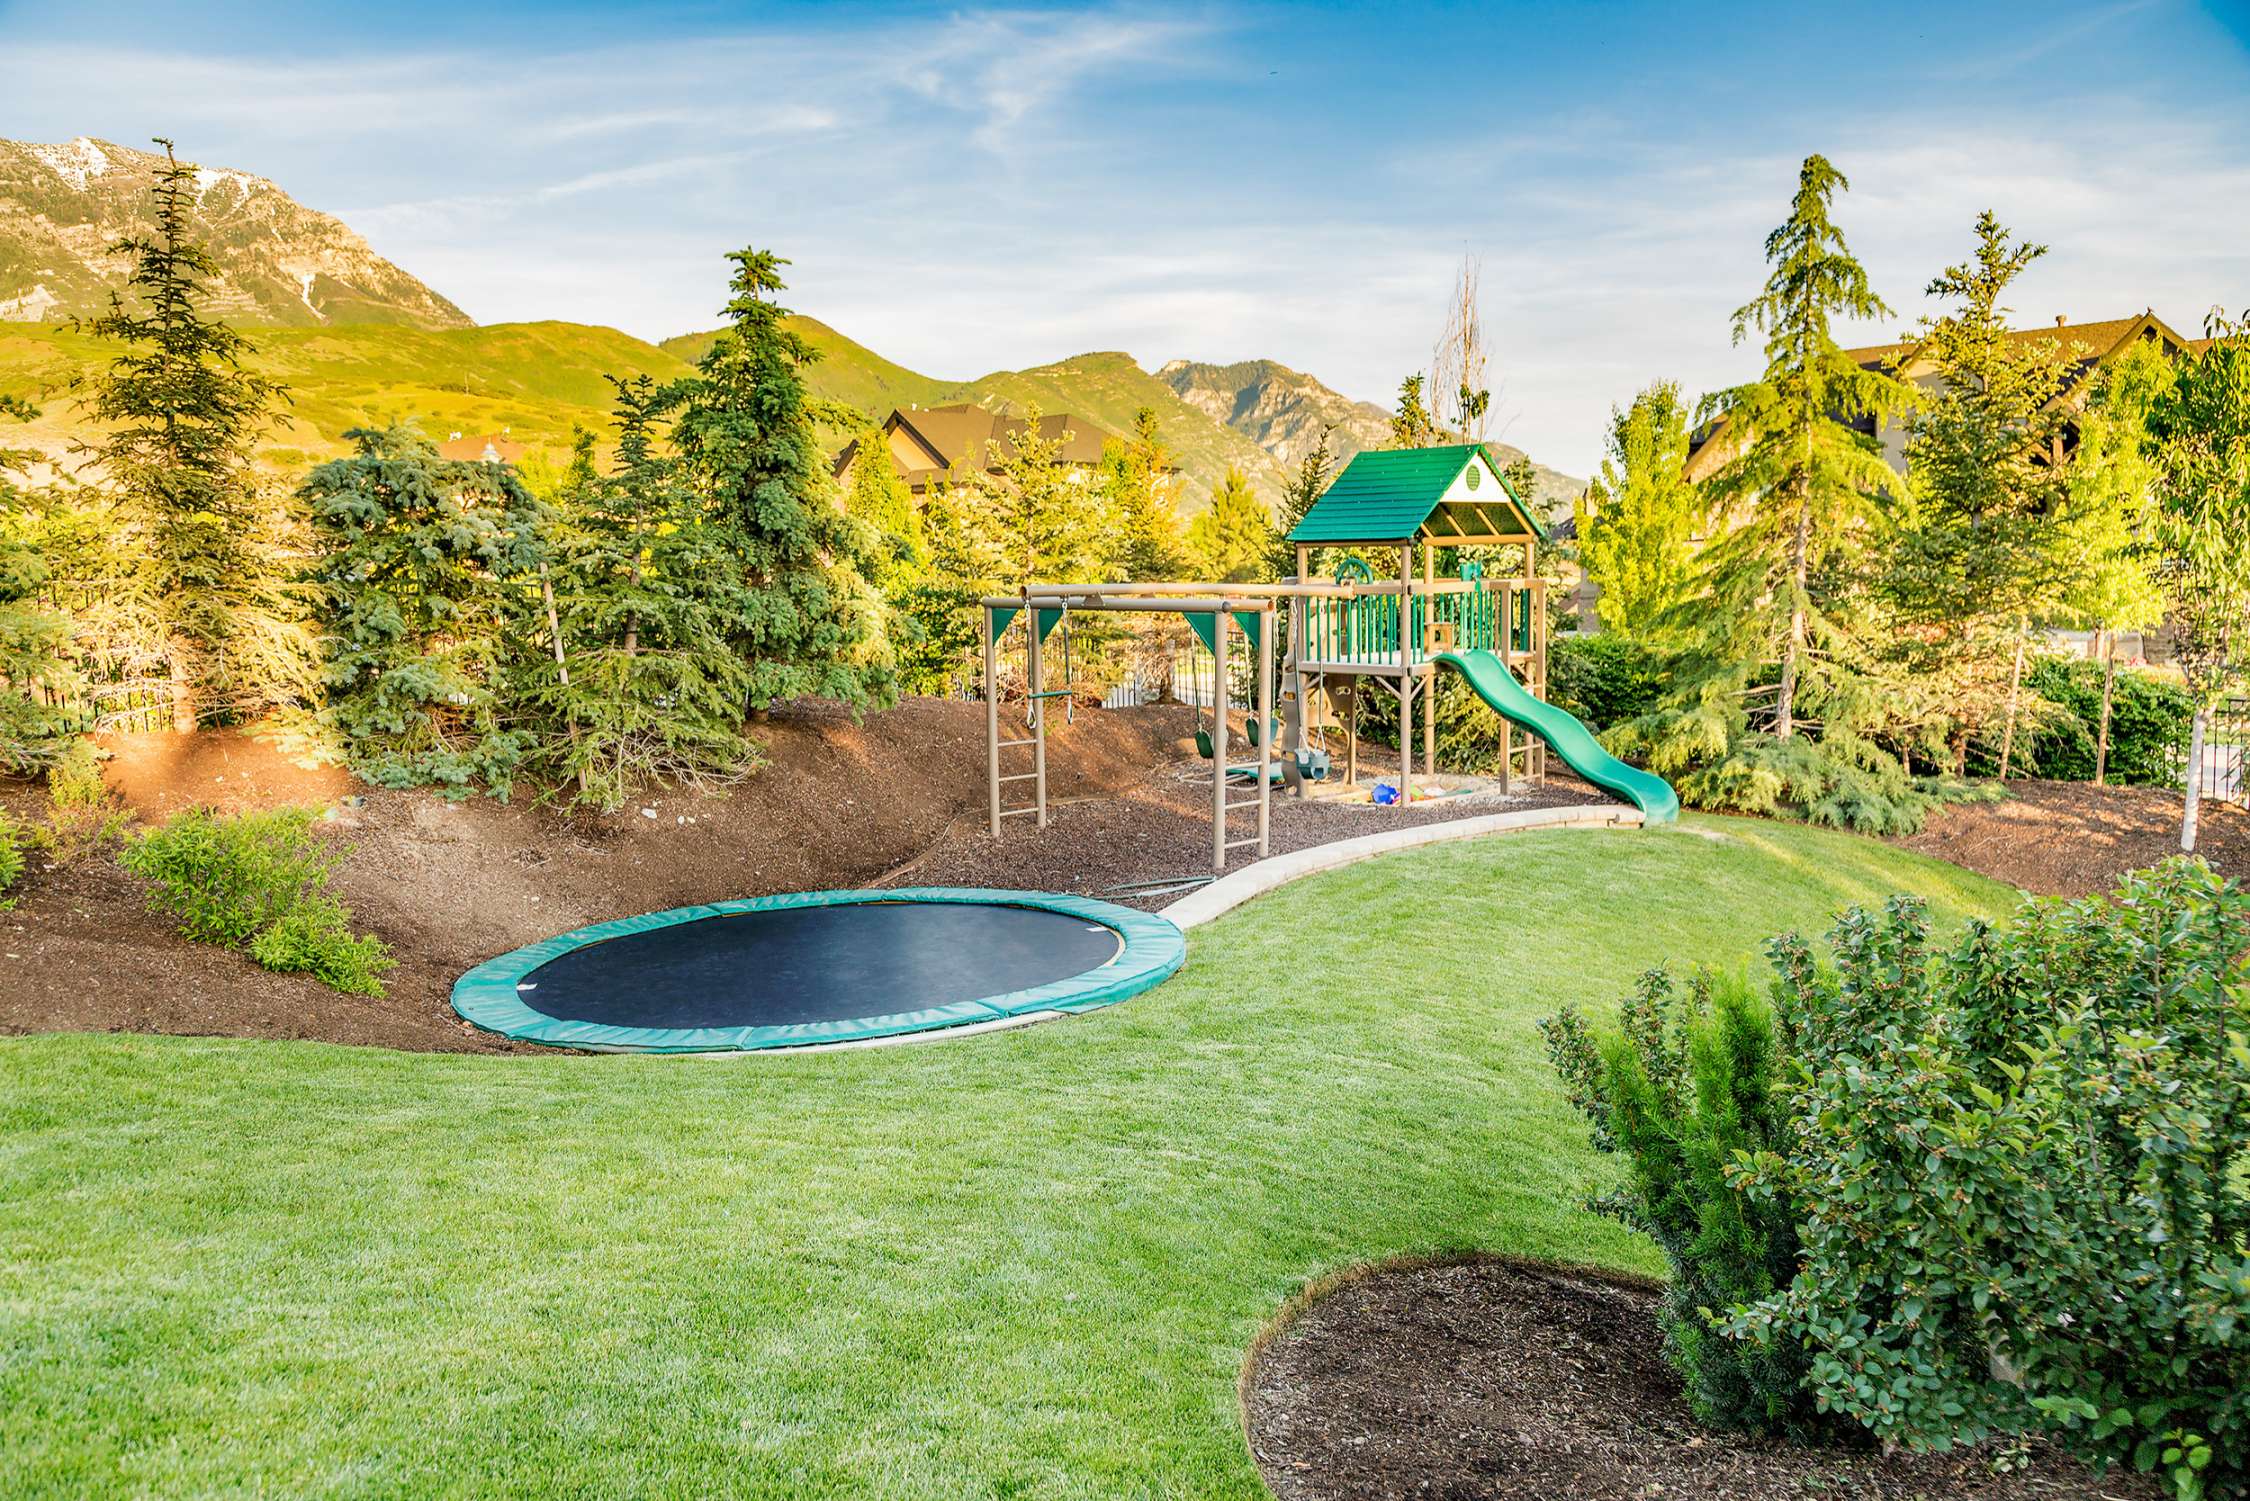 Mulch Outdoor Playset Ideas You